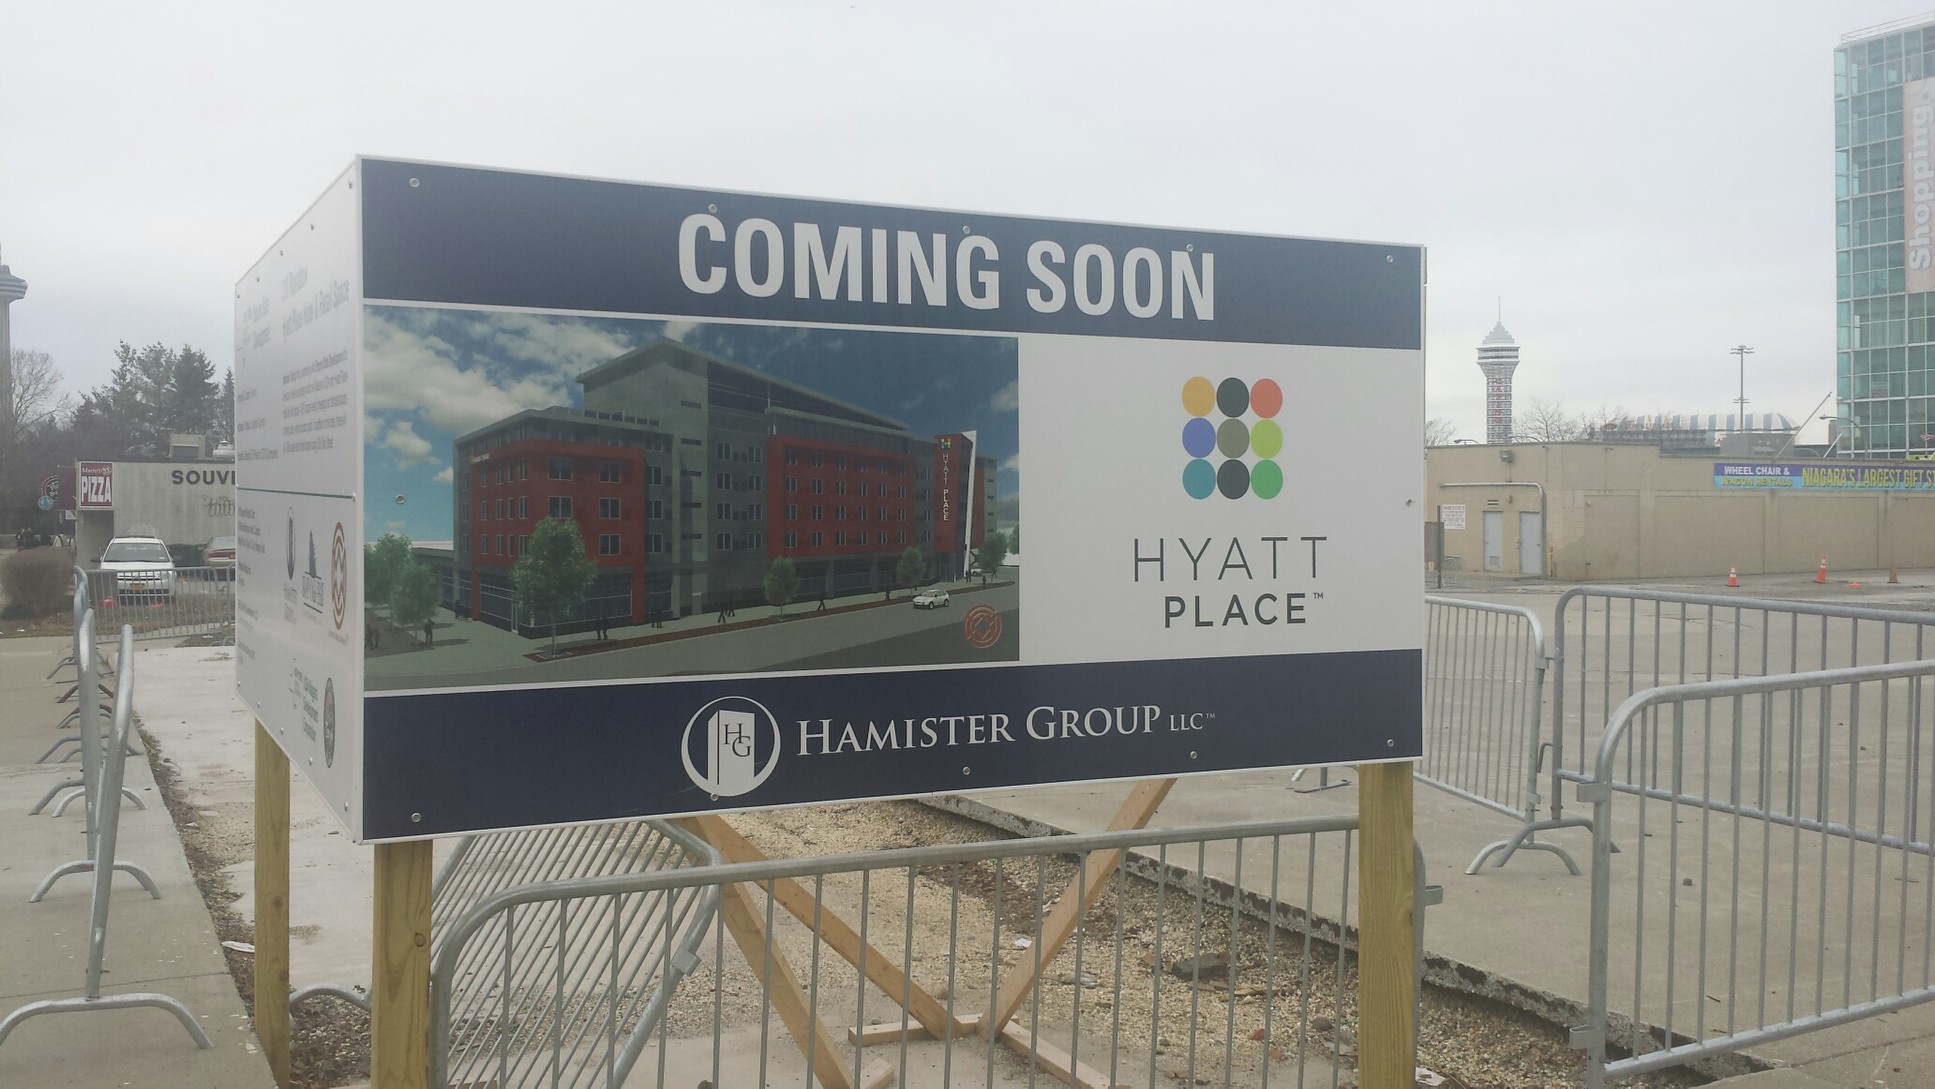 Above, a cheap wooden sign proclaims that do nothing Buffalo developer Mark Hamister's Hyatt Hotel on Rainbow Boulevard North Is COMING SOON. It is reminiscent of the sign below, which once stood a few hundred feet away, that proclaimed Aquafalls, an underground Aquarium, was COMING SOON. Aquafalls never came, and the Hamister hotel isn't likely too either.